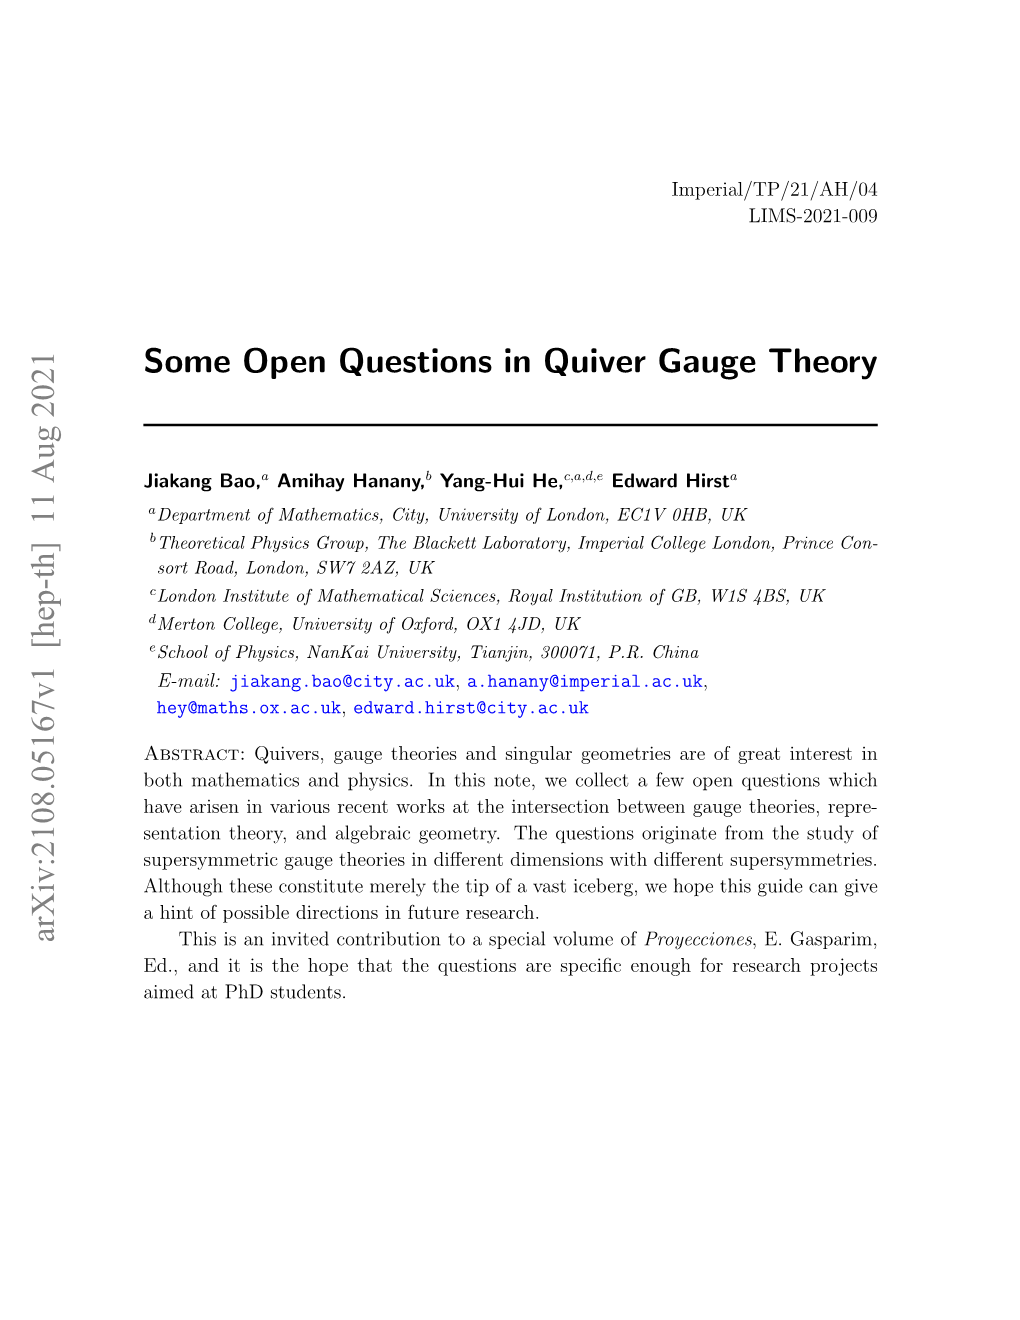 Some Open Questions in Quiver Gauge Theory Arxiv:2108.05167V1